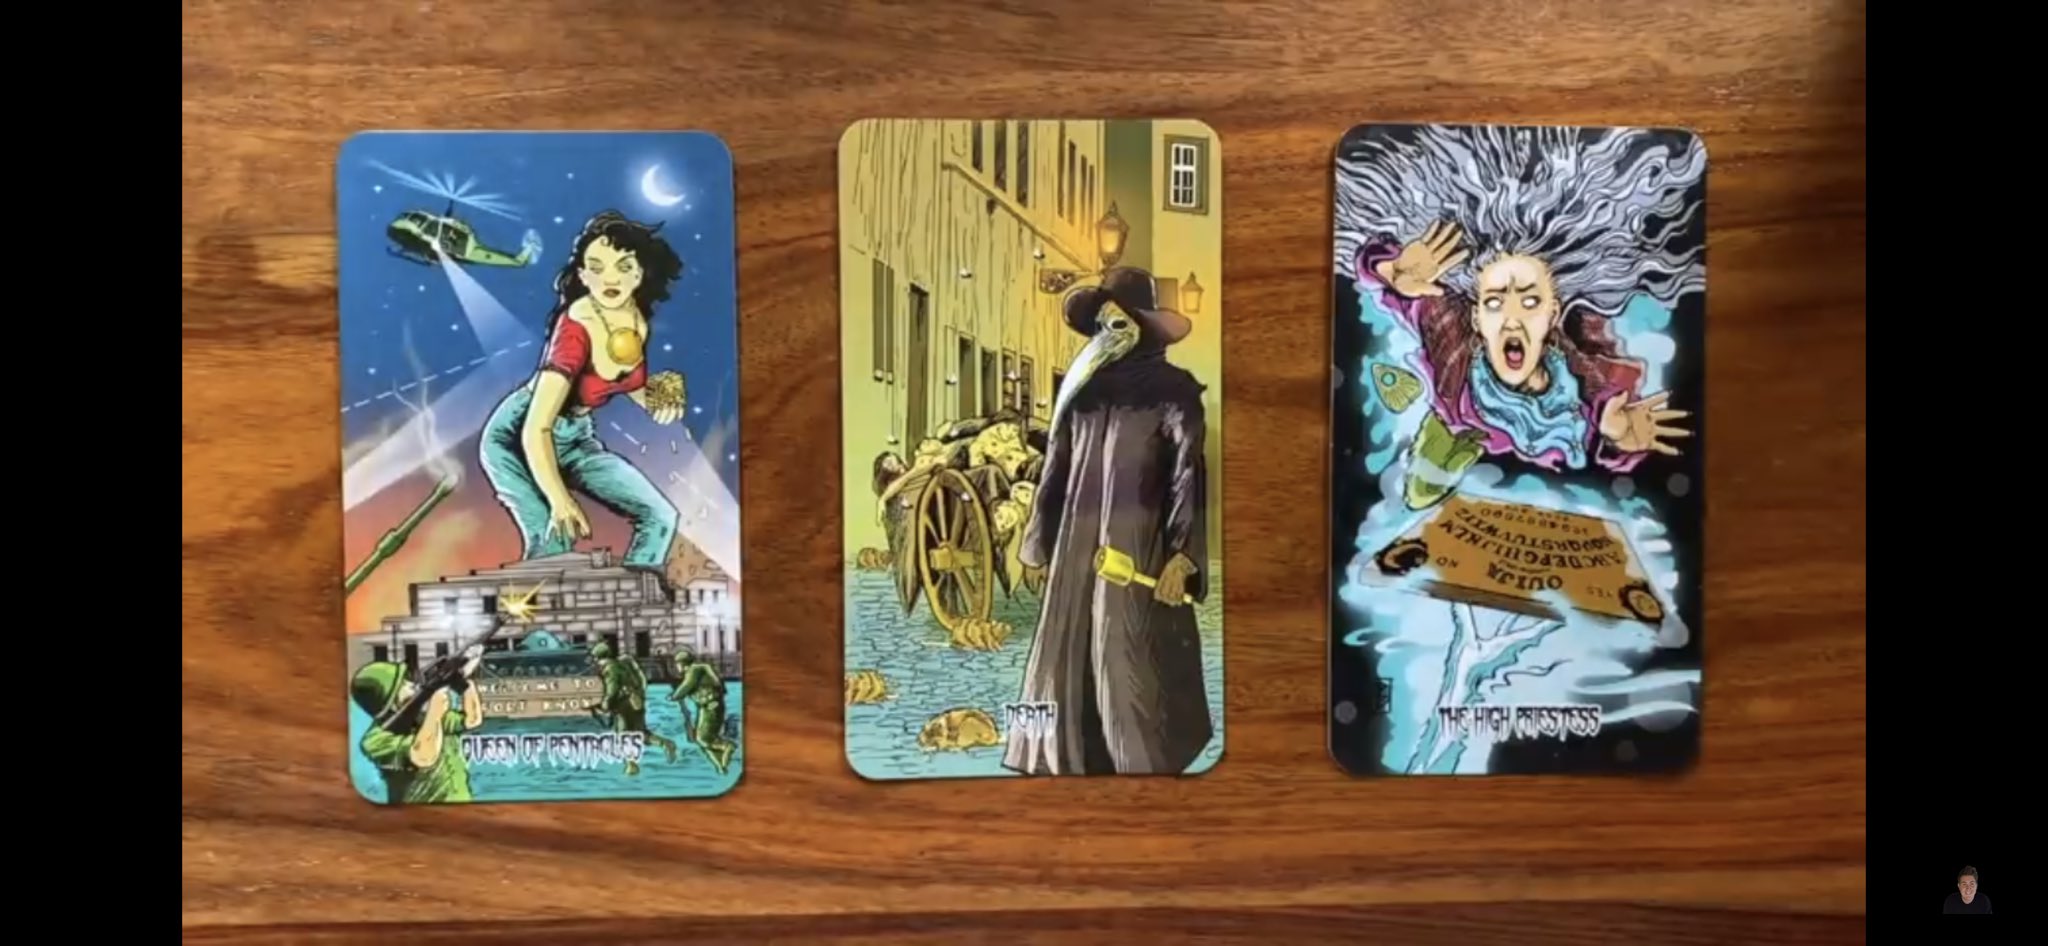 Scott 🧜‍♂️ on Twitter: "It's #hashtag day! 😂 For today's #daily # tarot #reading, March 21st, I use the #Twisted #Tales #Tarot. It's a fun #deck. 💕😂 You can watch the #video